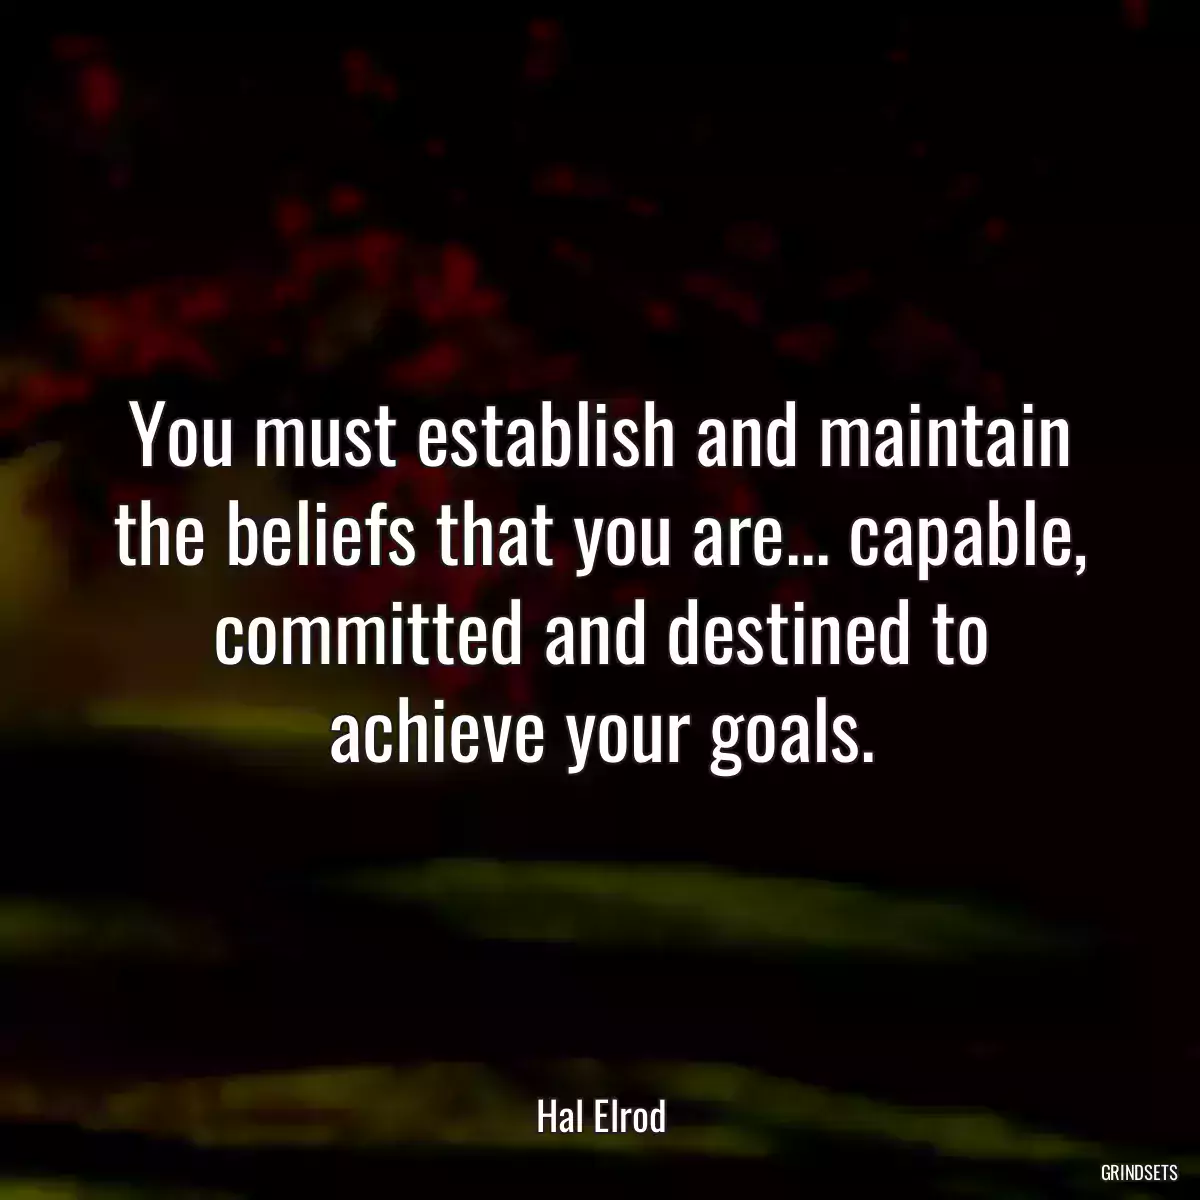 You must establish and maintain the beliefs that you are... capable, committed and destined to achieve your goals.